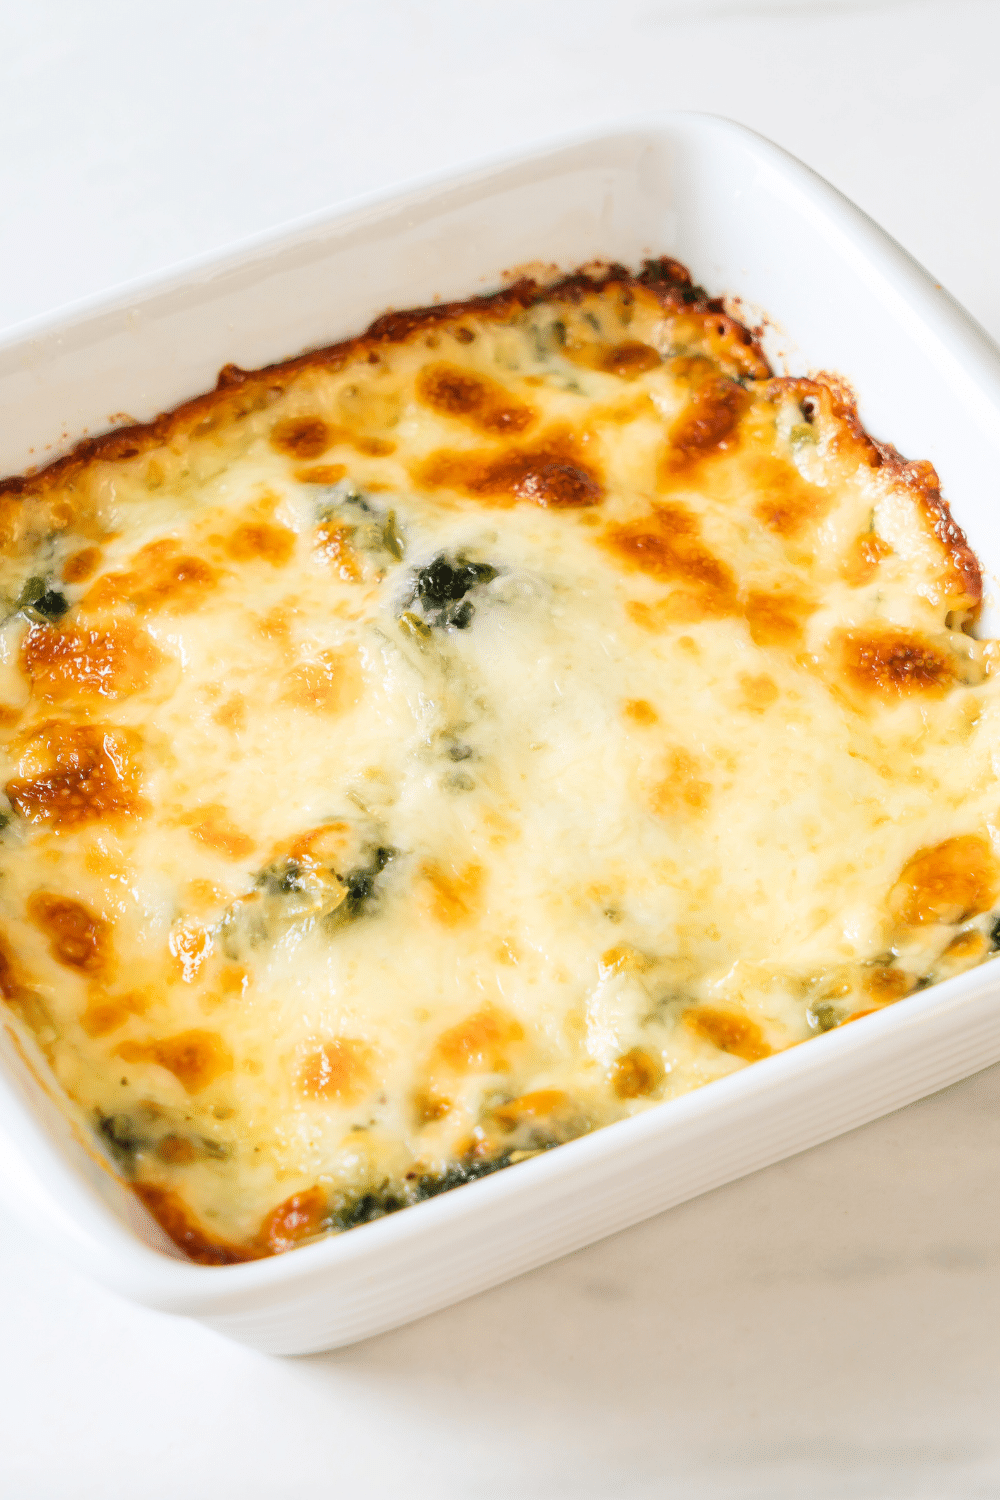 Chicken Spinach and Artichoke Casserole. The delicate blend of spinach, artichoke, and tender chicken make this dish a delicious and satisfying low-carb meal.